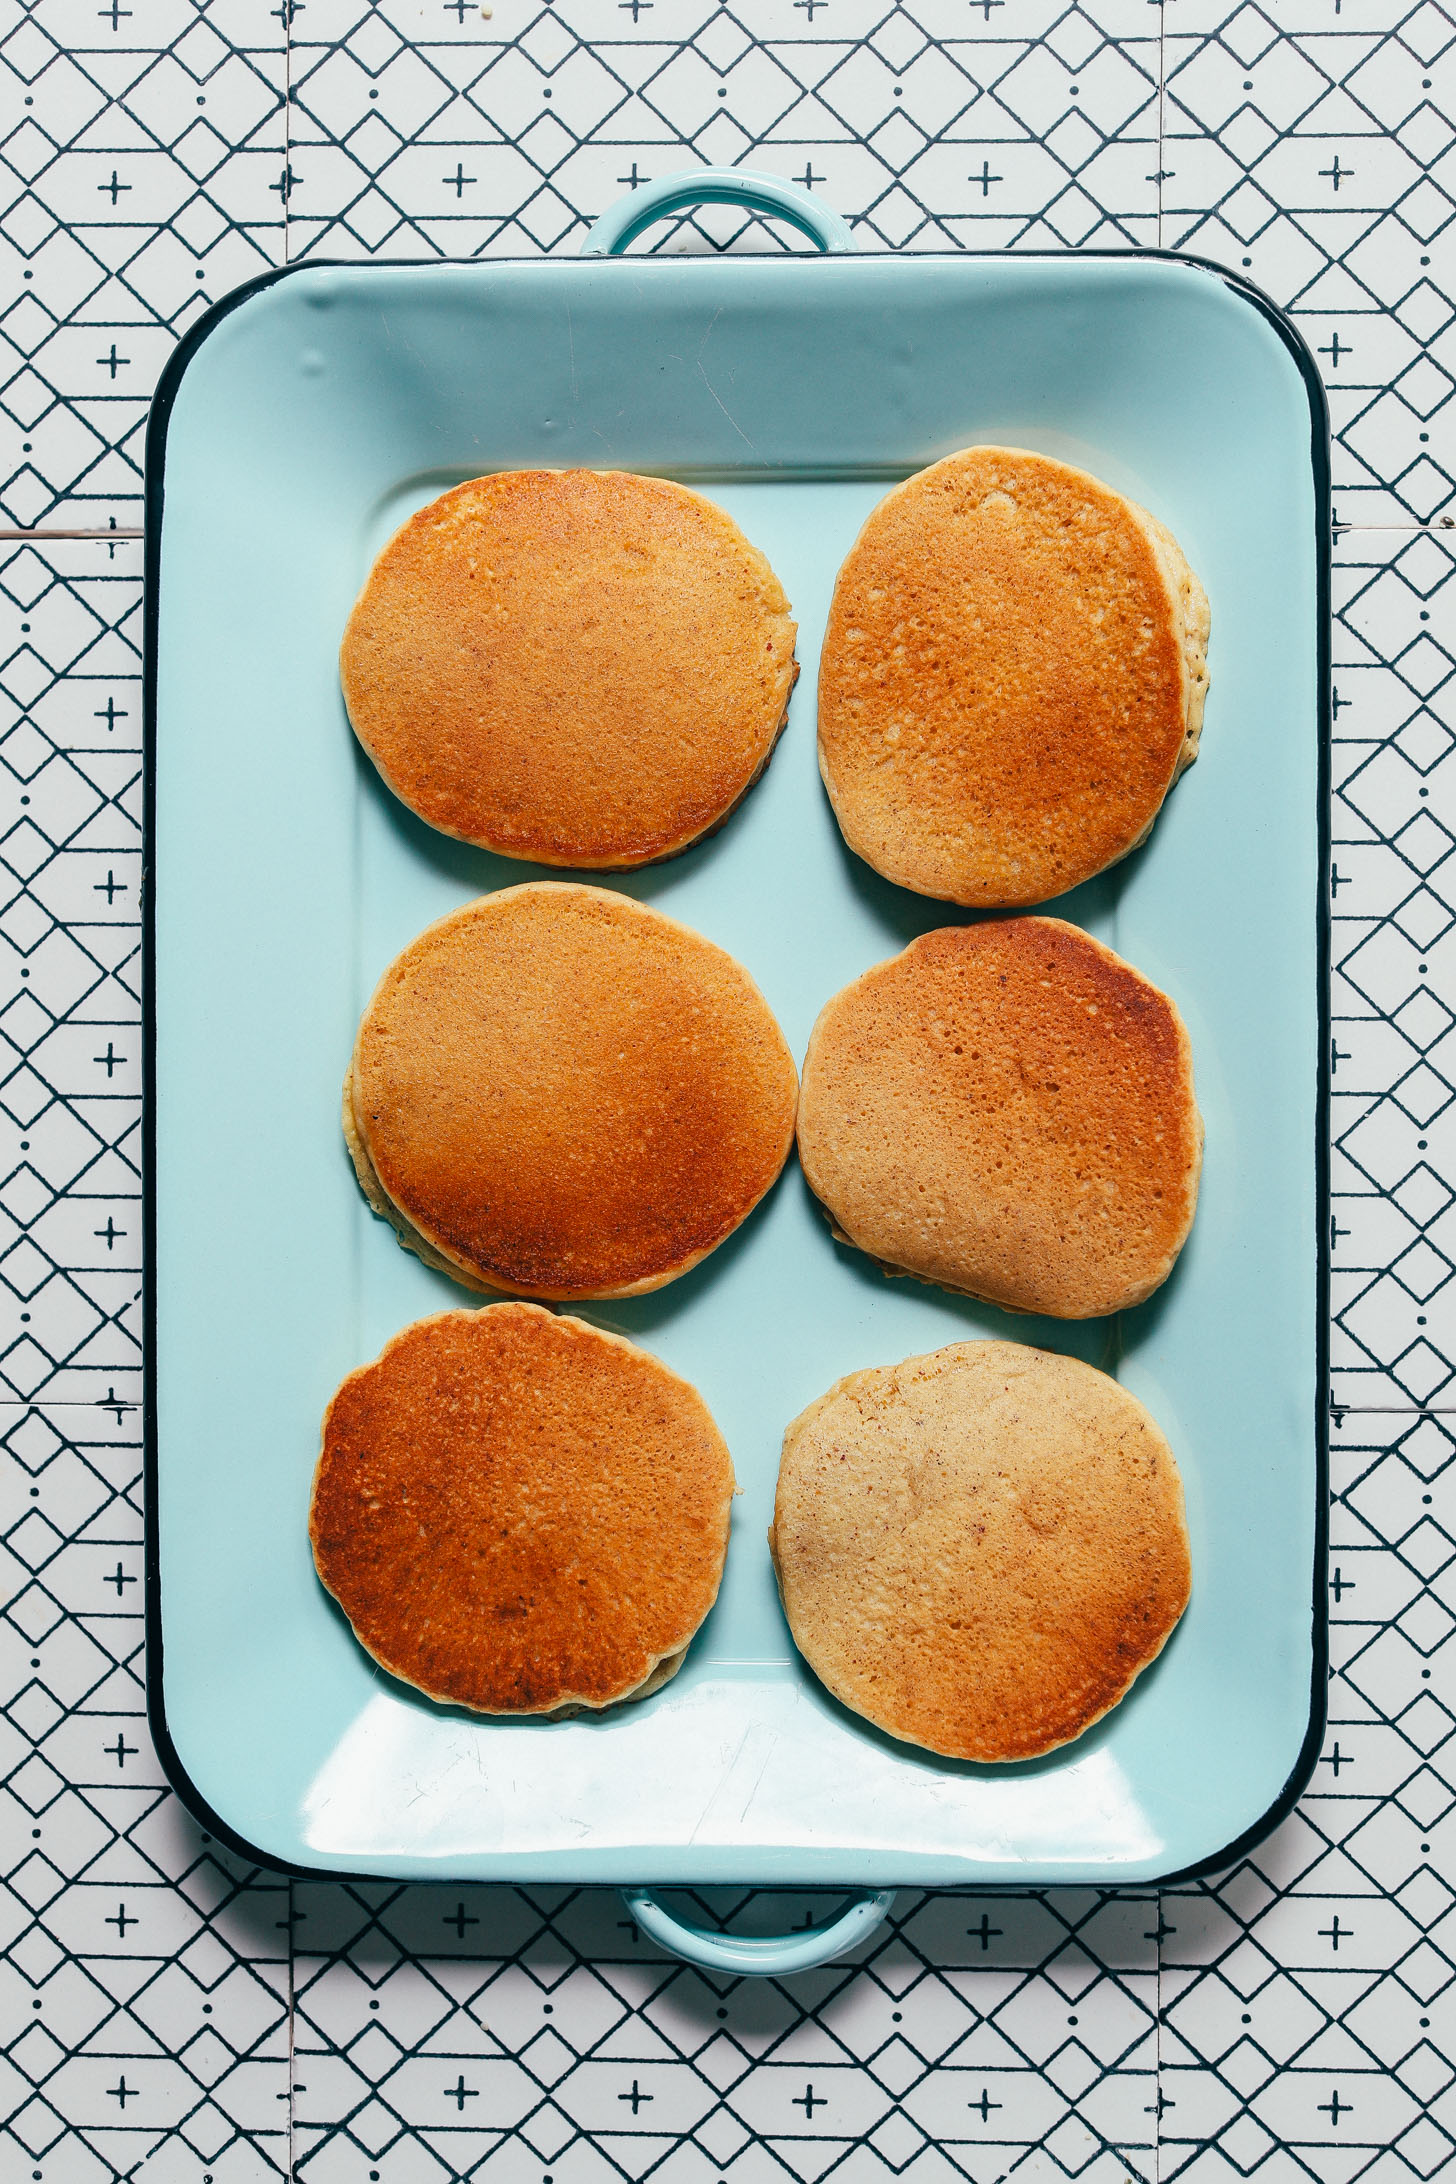 Tray of perfectly browned Grain-Free Pancakes